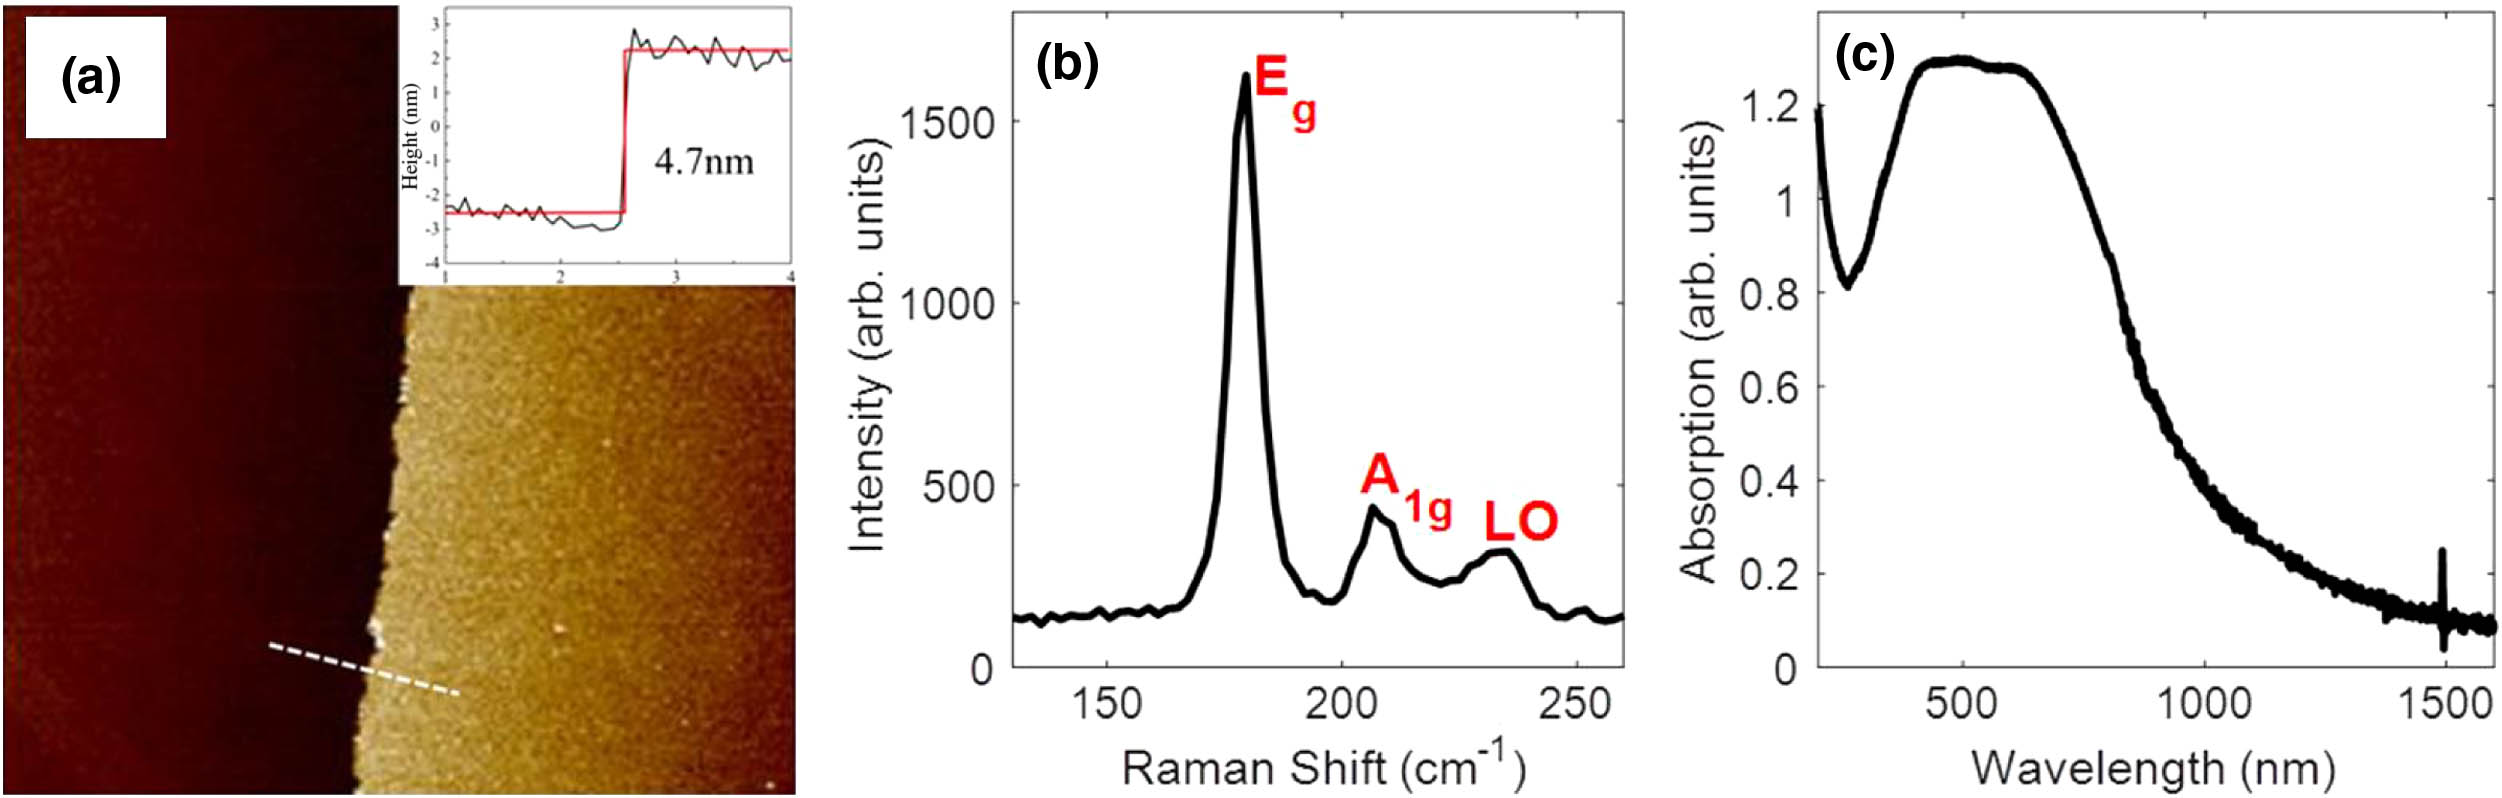 (a) AFM image of the CVD-grown PtSe2 film on the sapphire substrate. The red curve shows the thickness along the white dashed line. (b) Representative Raman spectrum of PtSe2 film taken at a 514 nm excitation wavelength. (c) Absorption spectrum of the PtSe2 film.